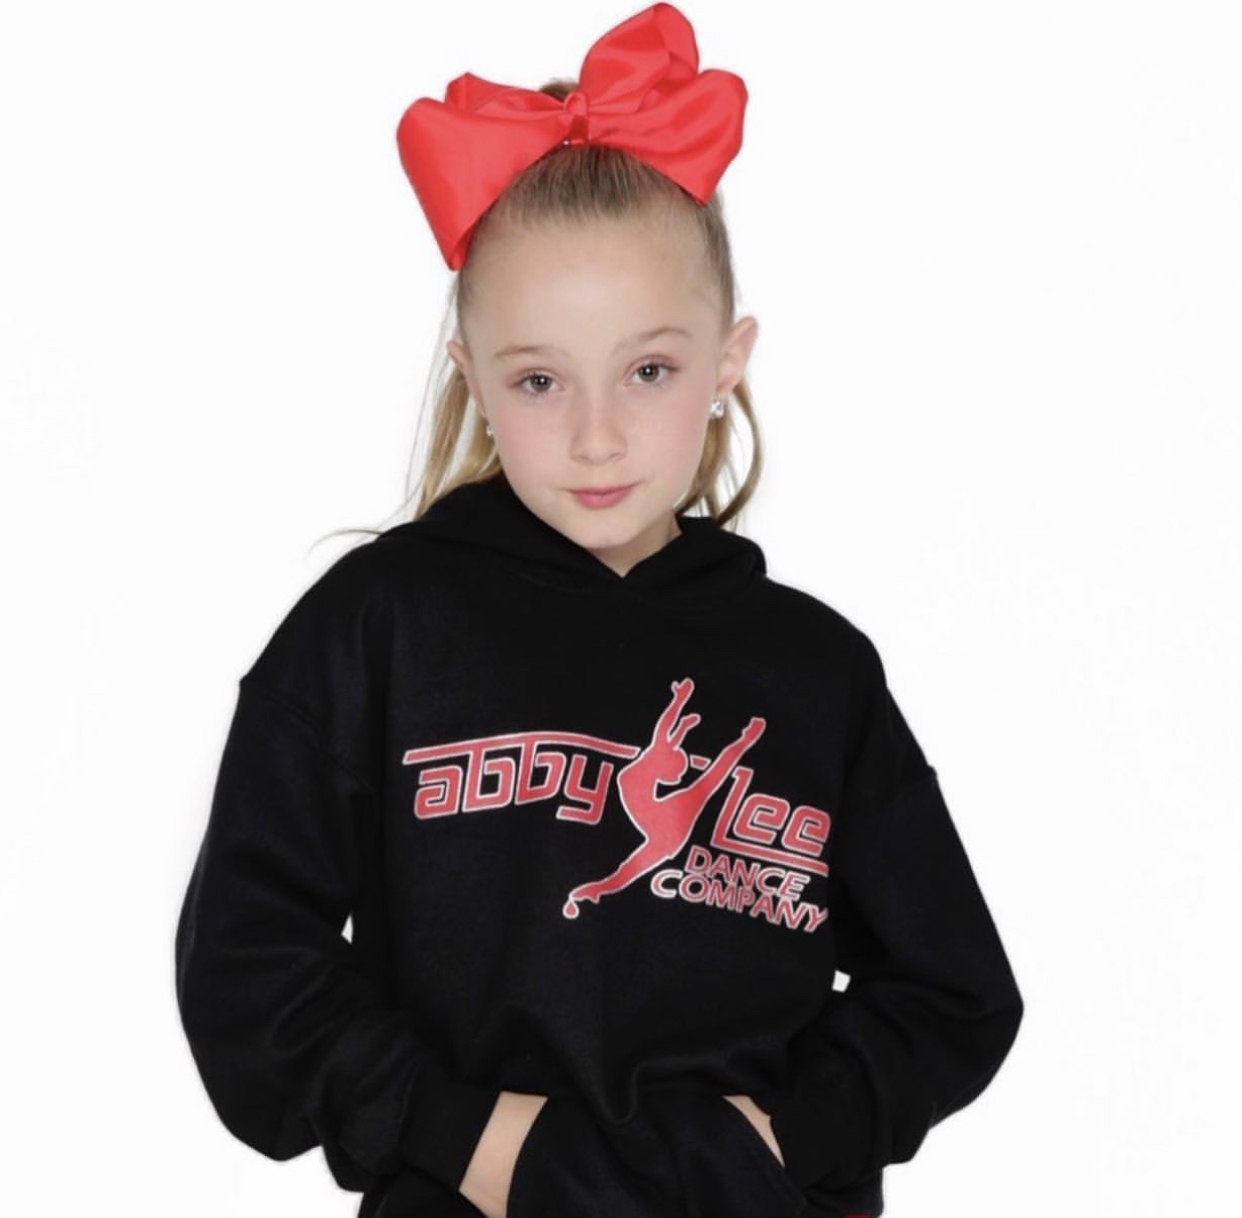 ALDC TEAM JACKETS – Abby Lee